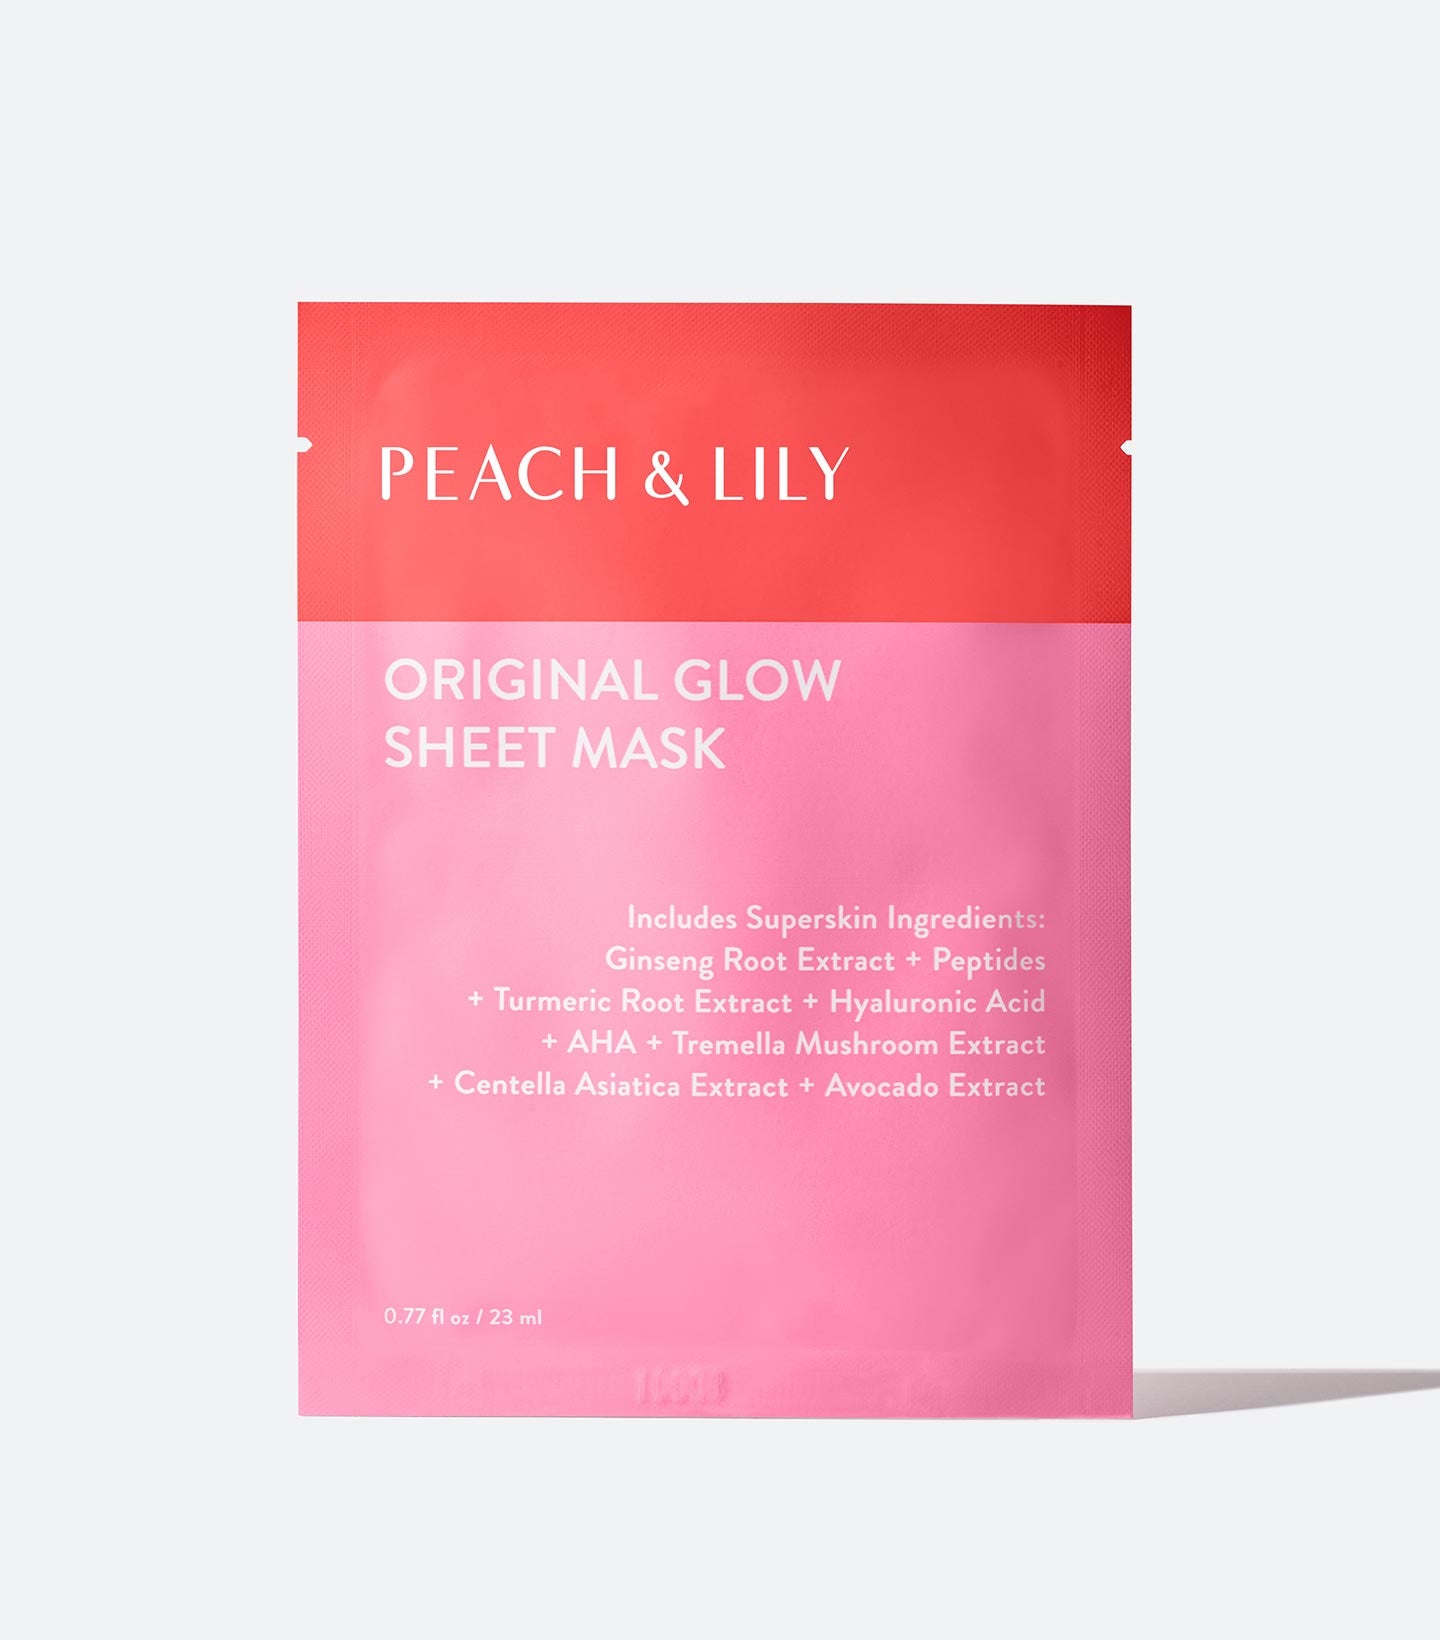 A package of Peach & Lily Original Glow Sheet Mask